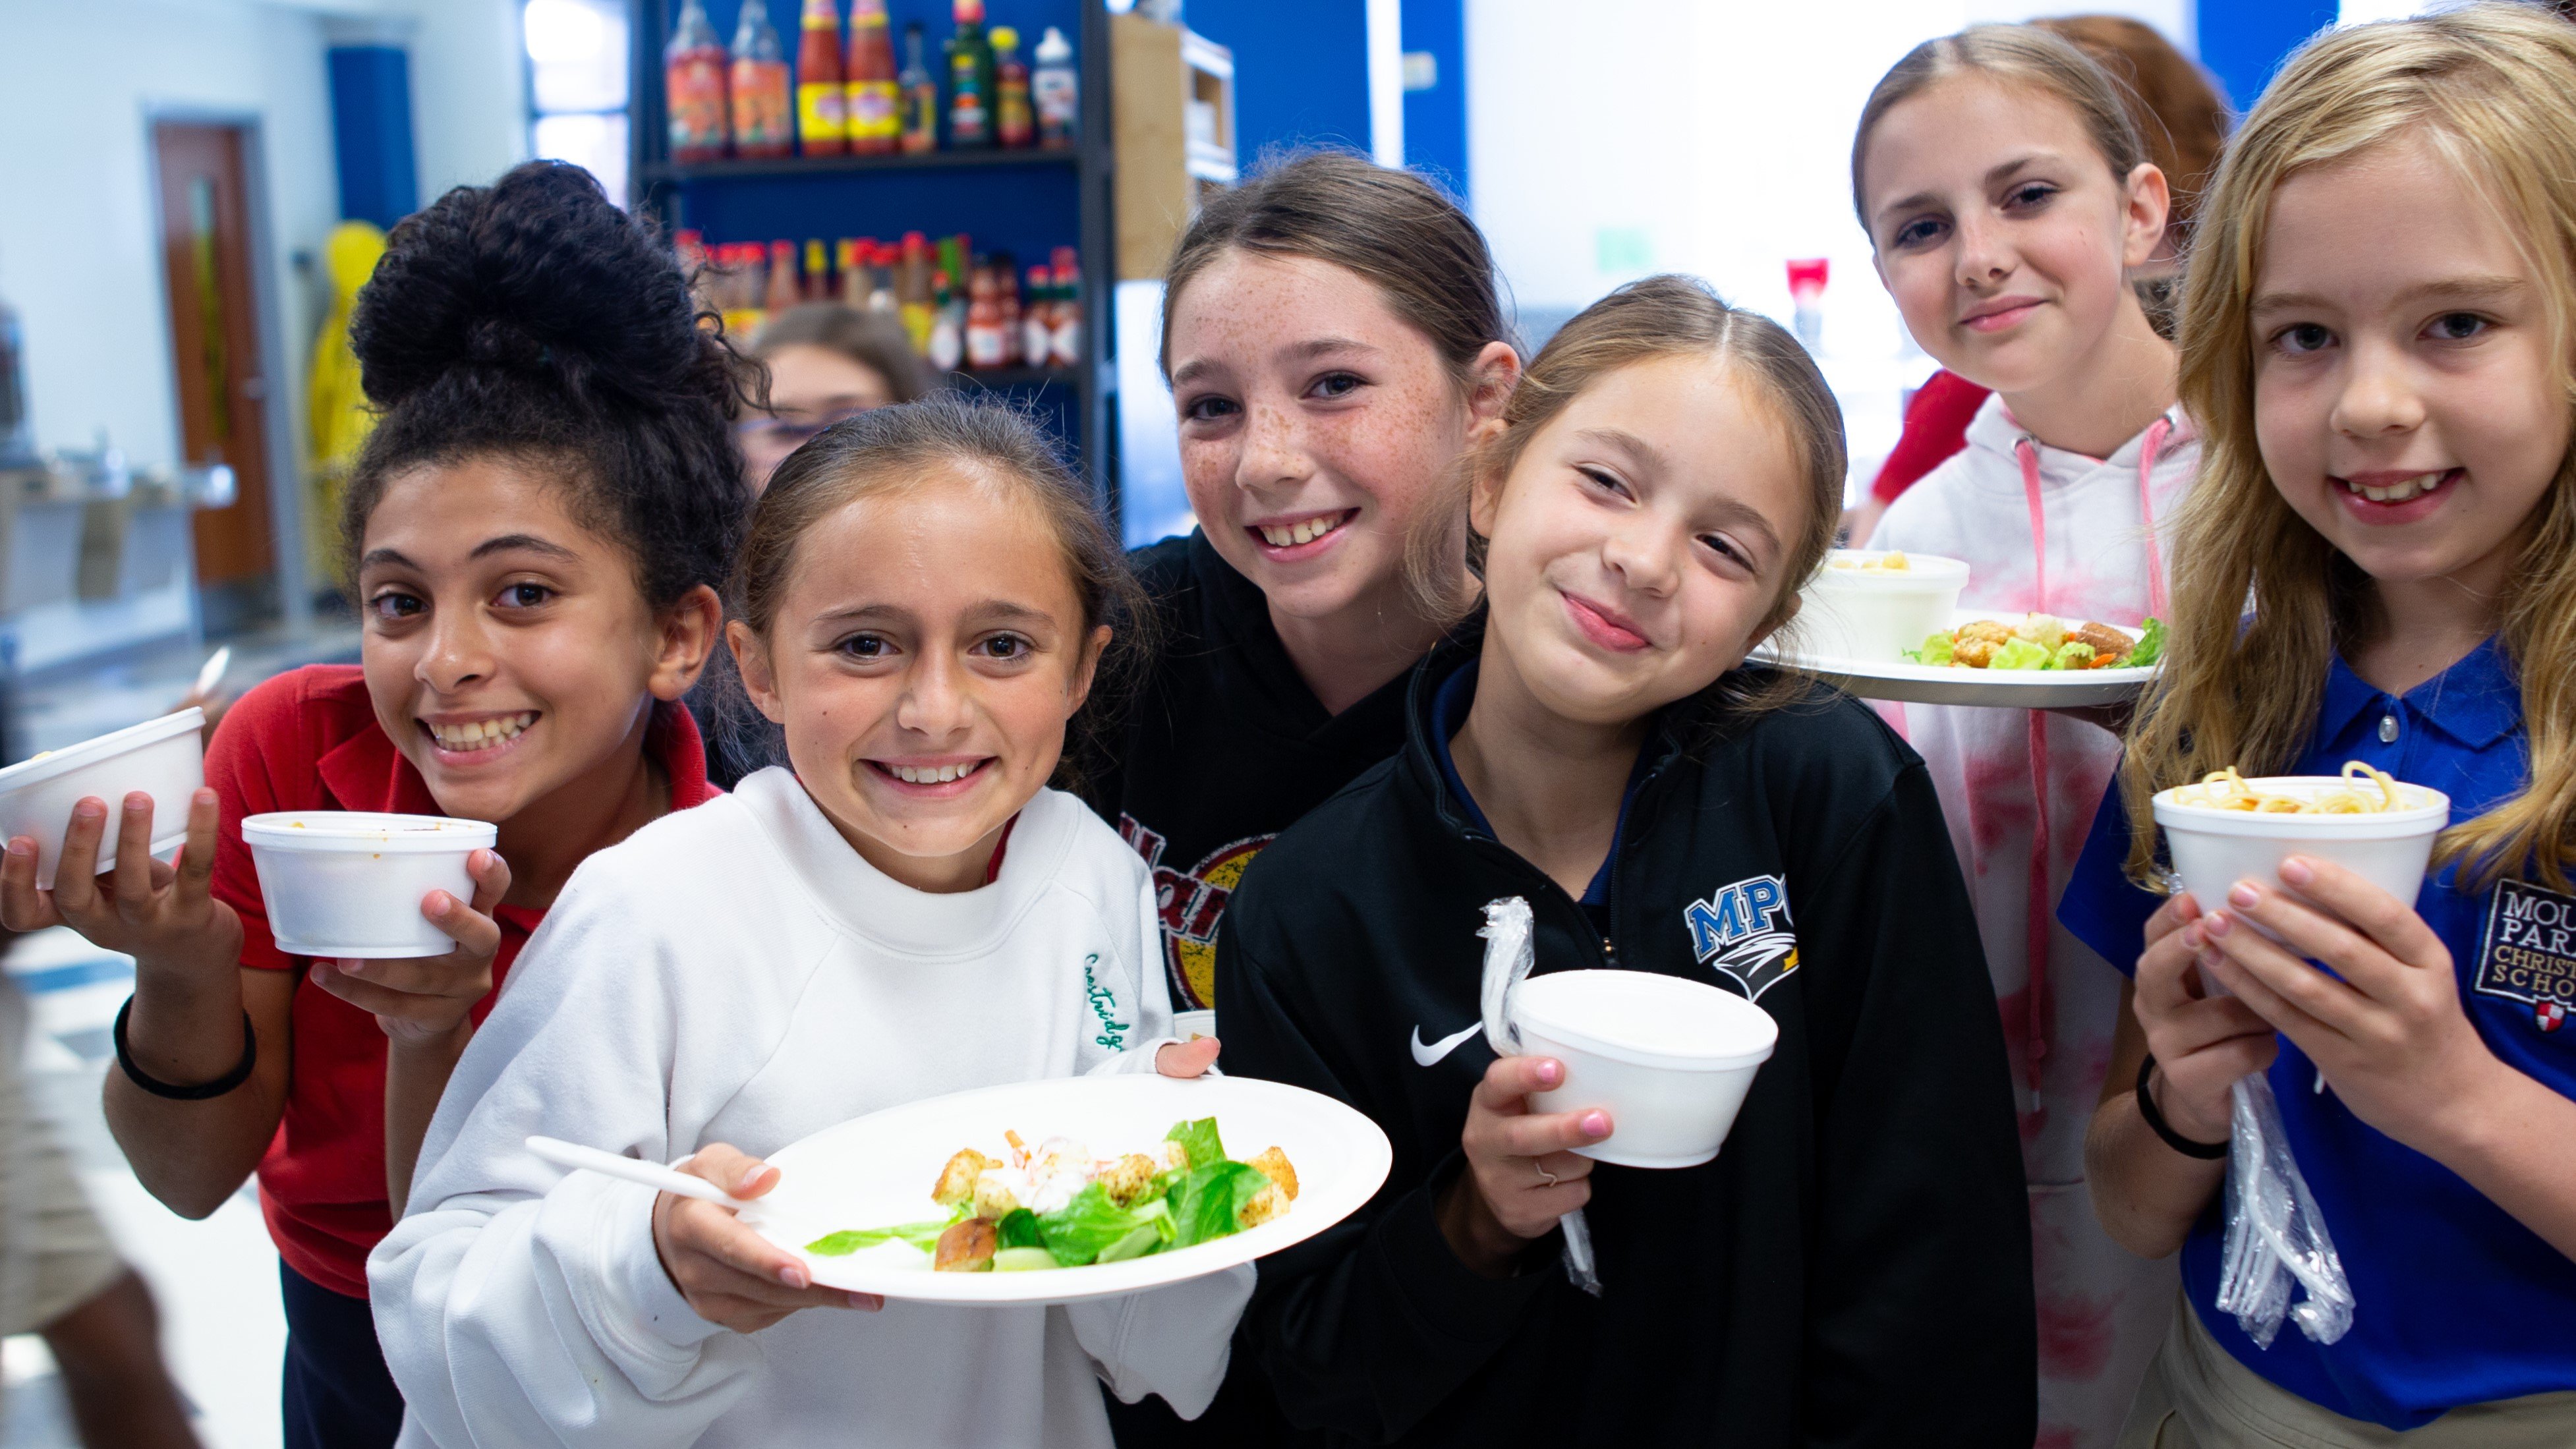 Fueling Students for Academic Success: How School Nutrition Affects Performance